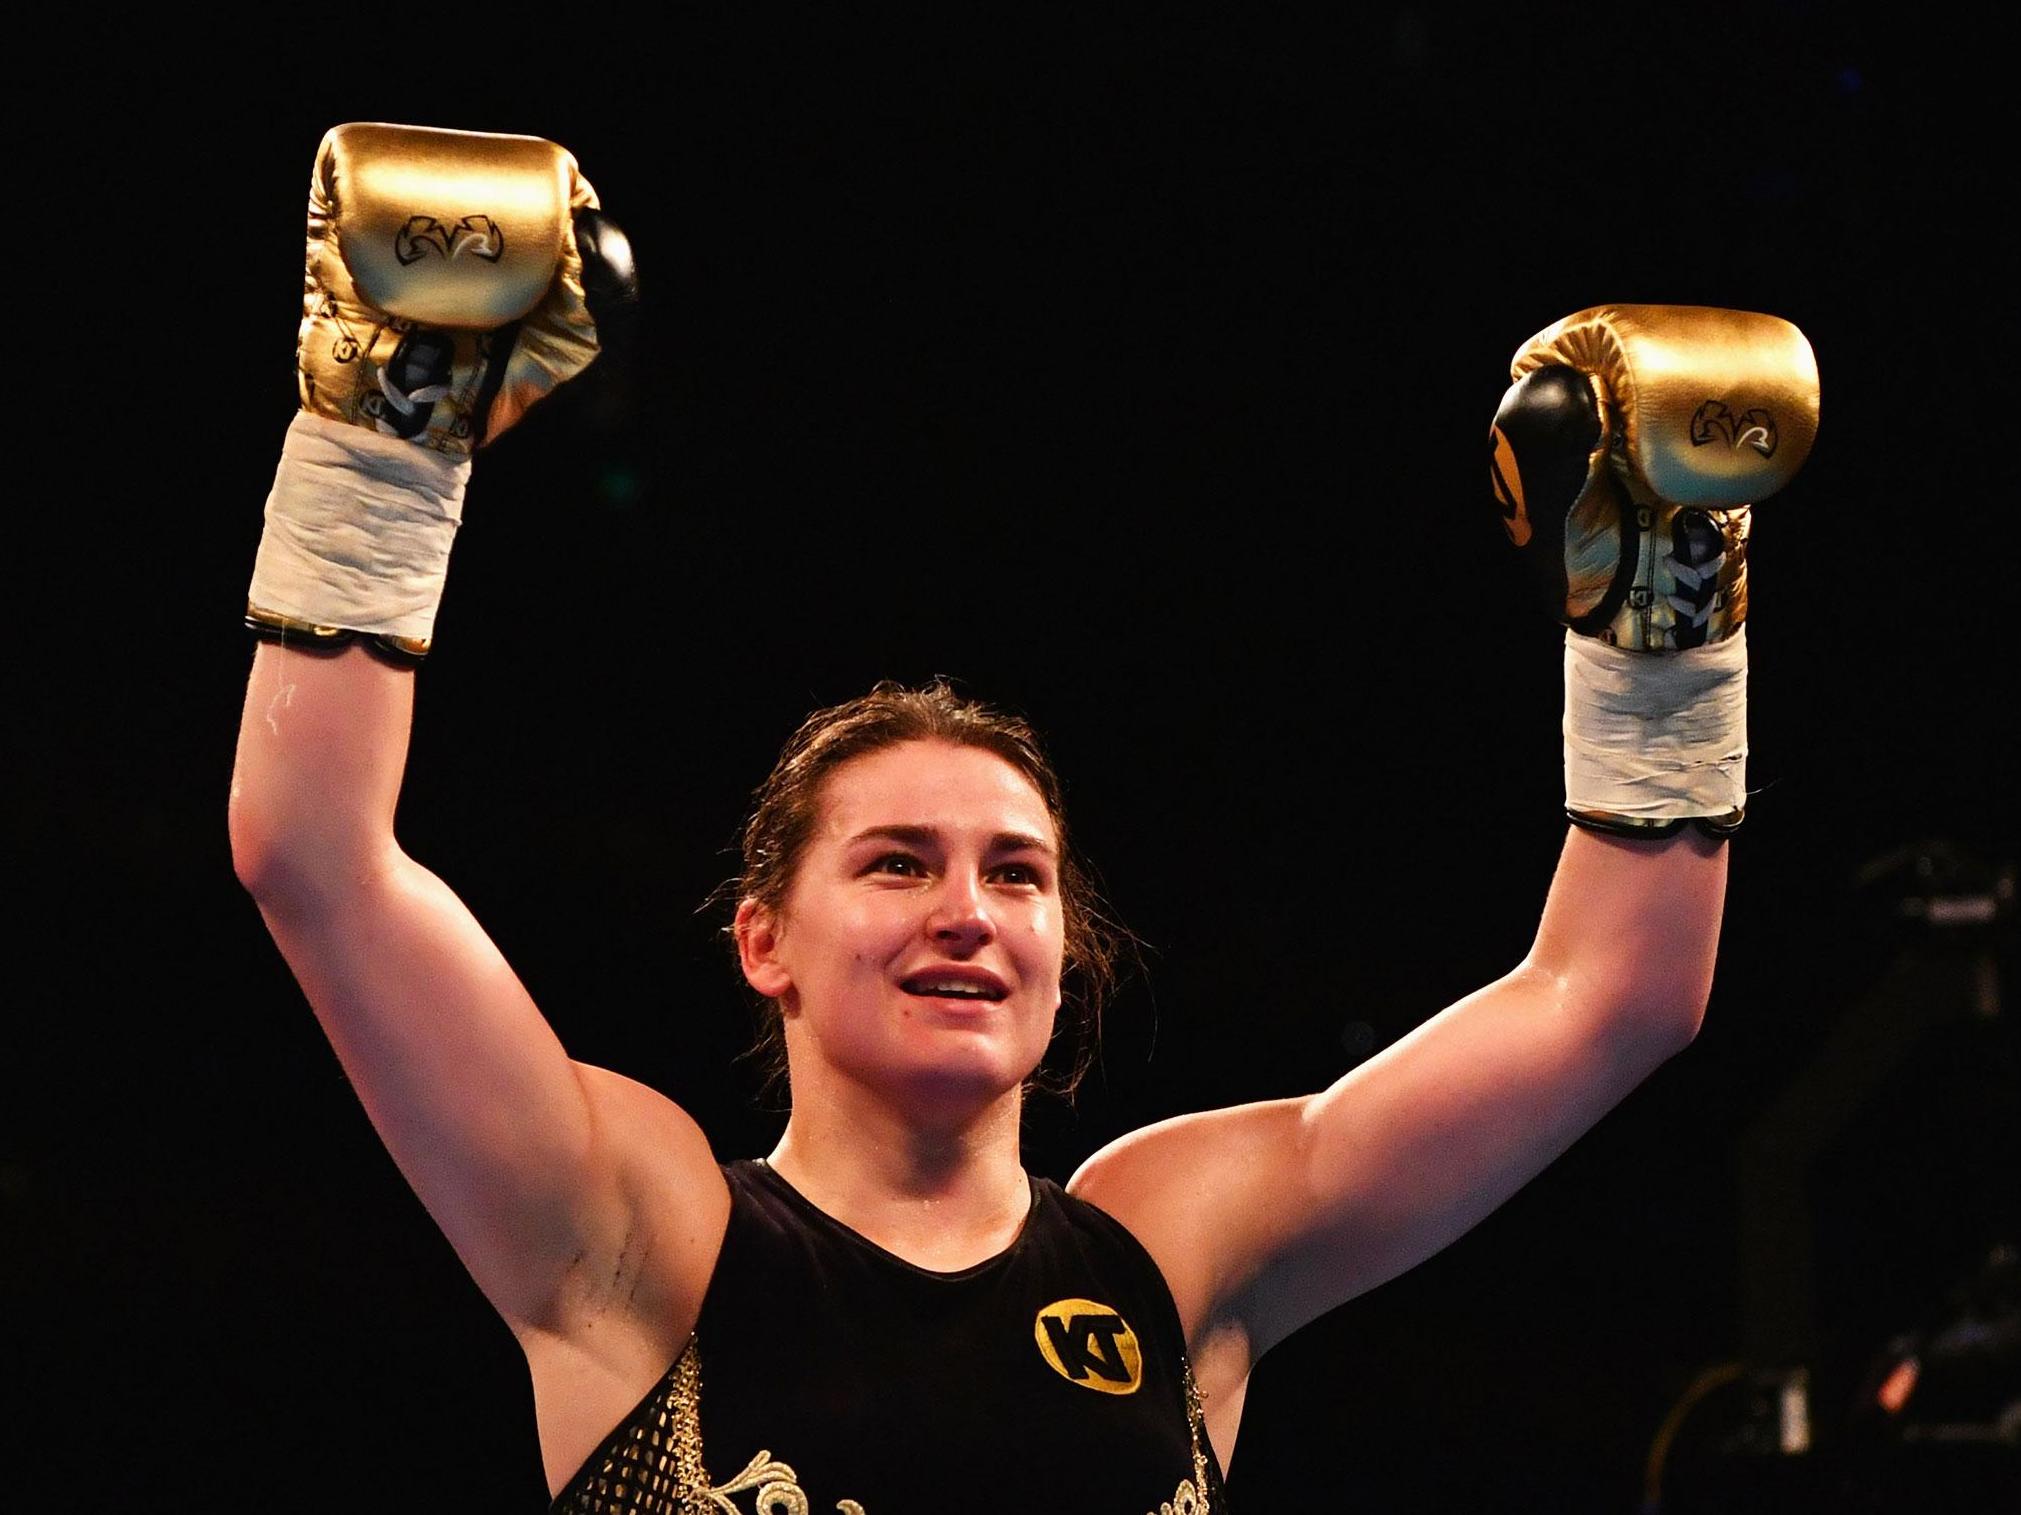 With the likes of Katie Taylor at the forefront women's boxing has a bright future